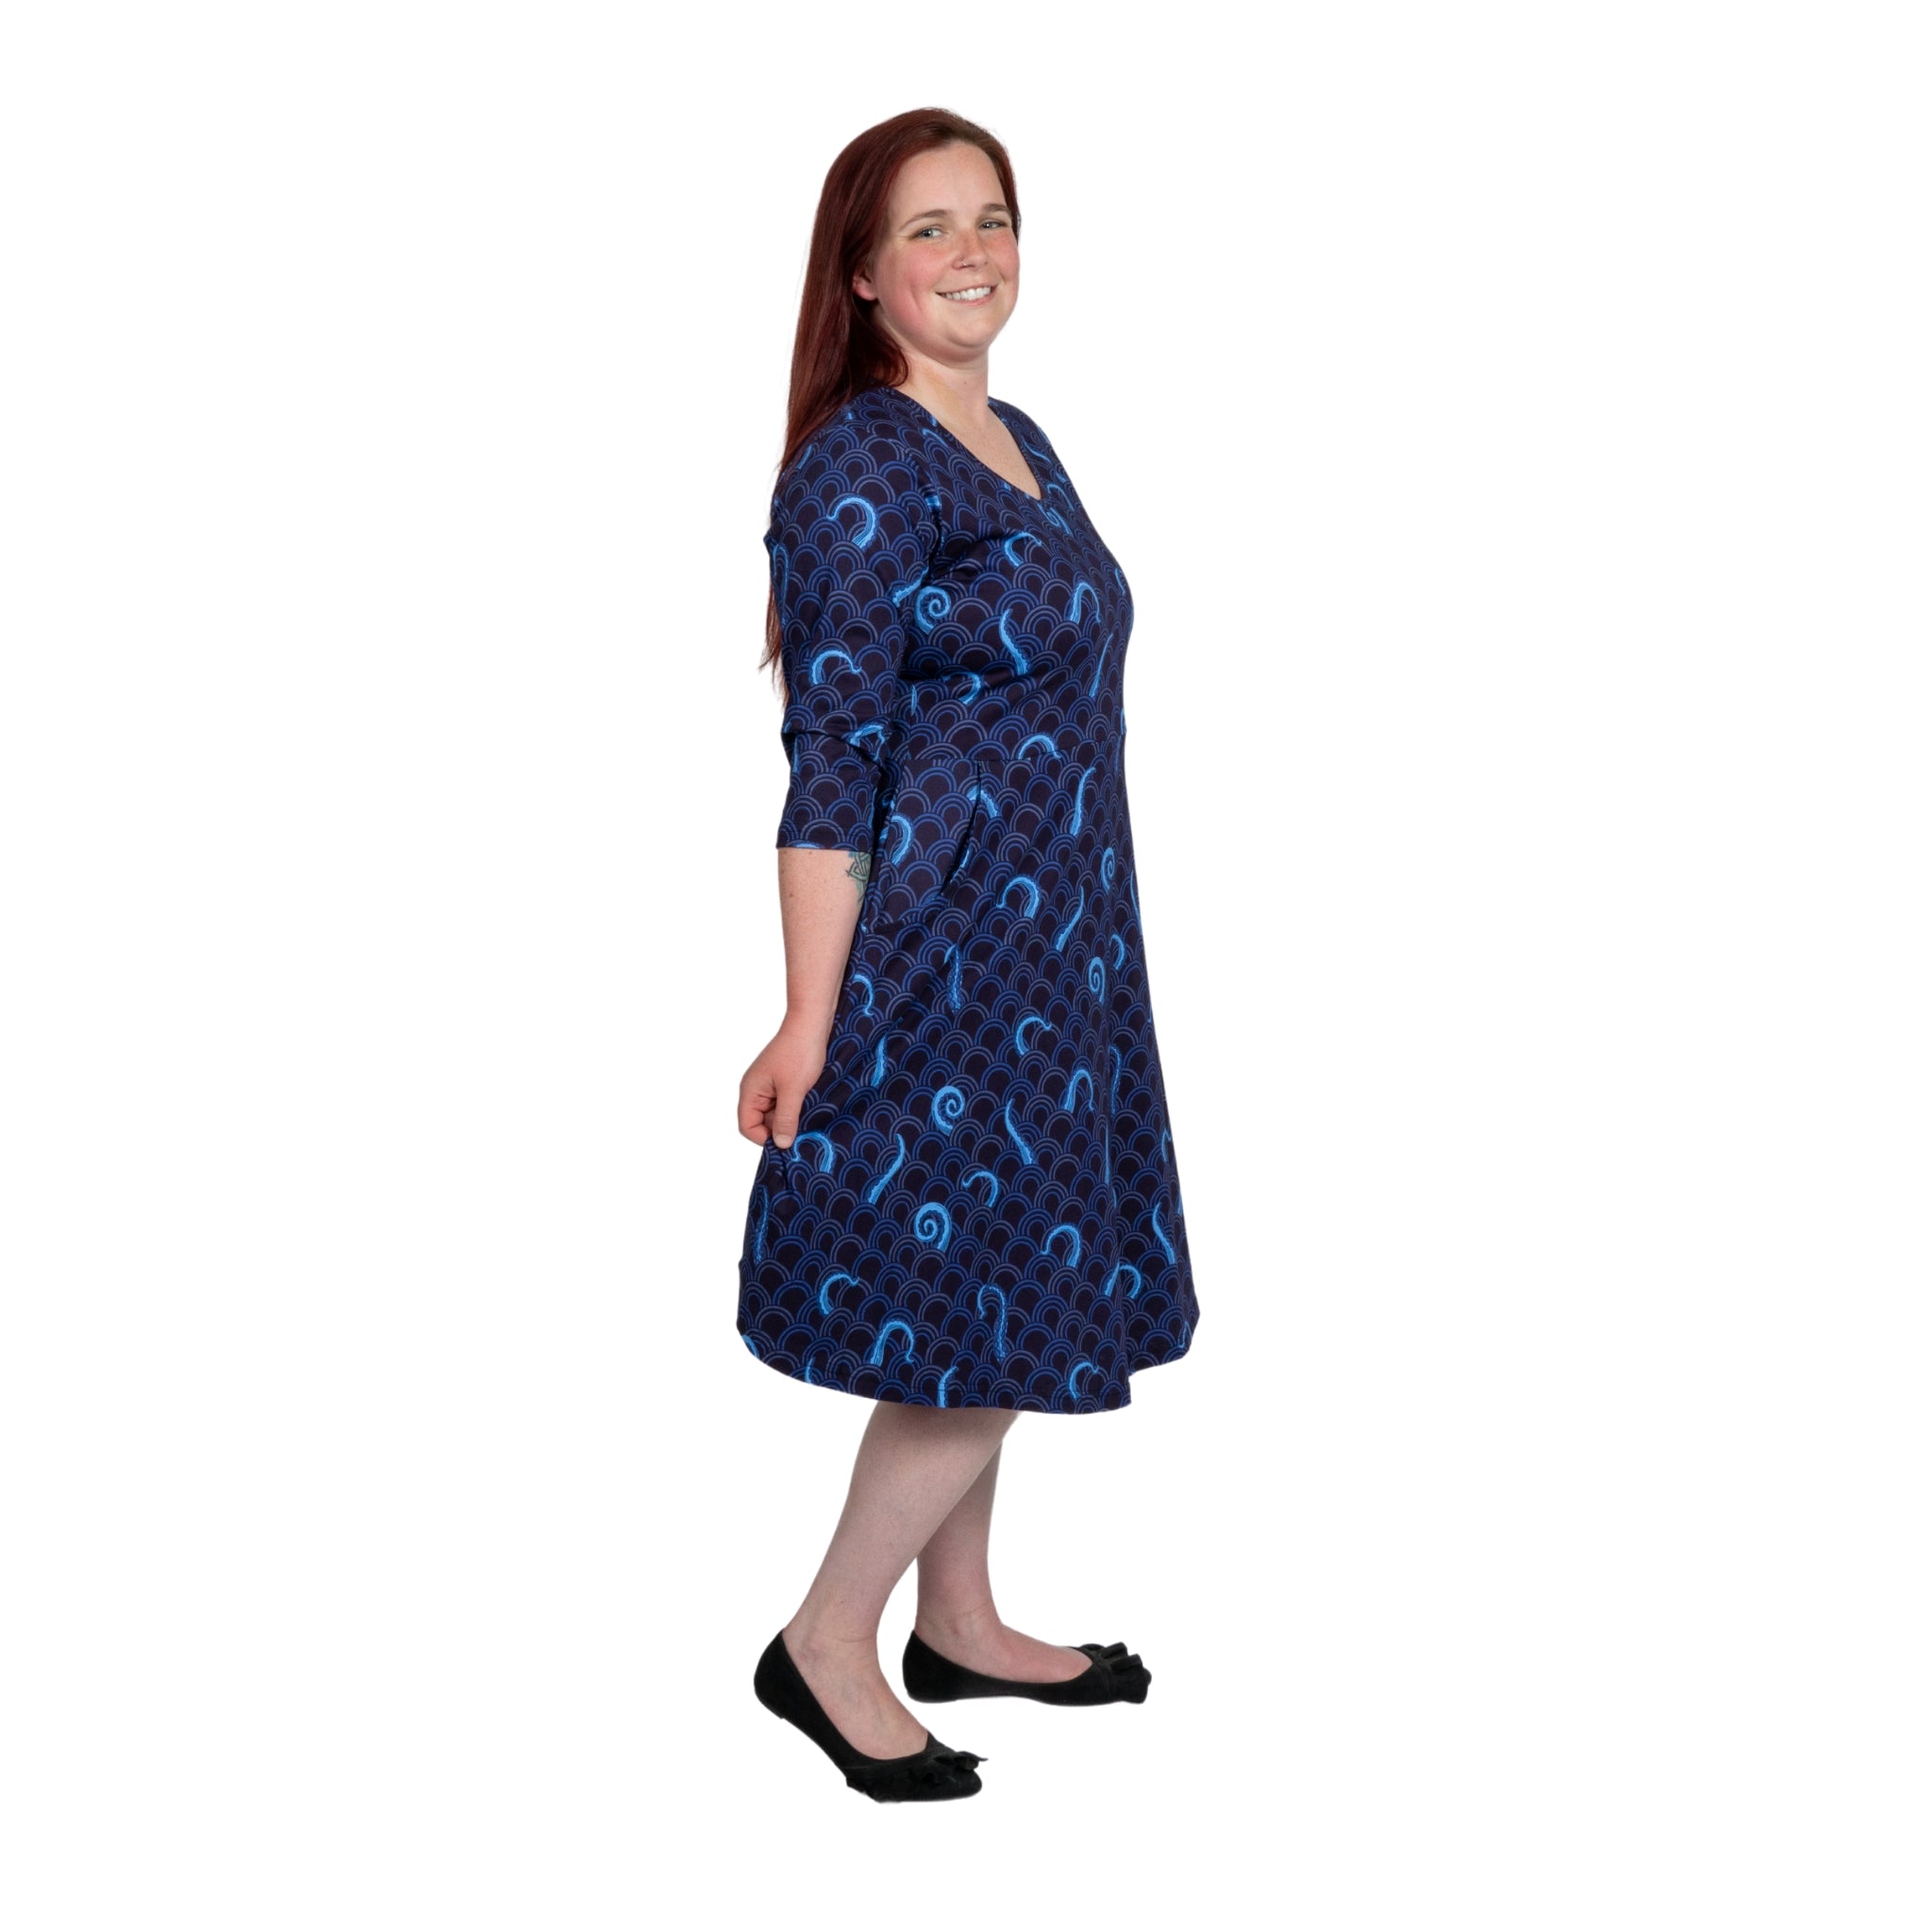 Octopus in the Sea 3/4th Sleeves Fit & Flare Dress